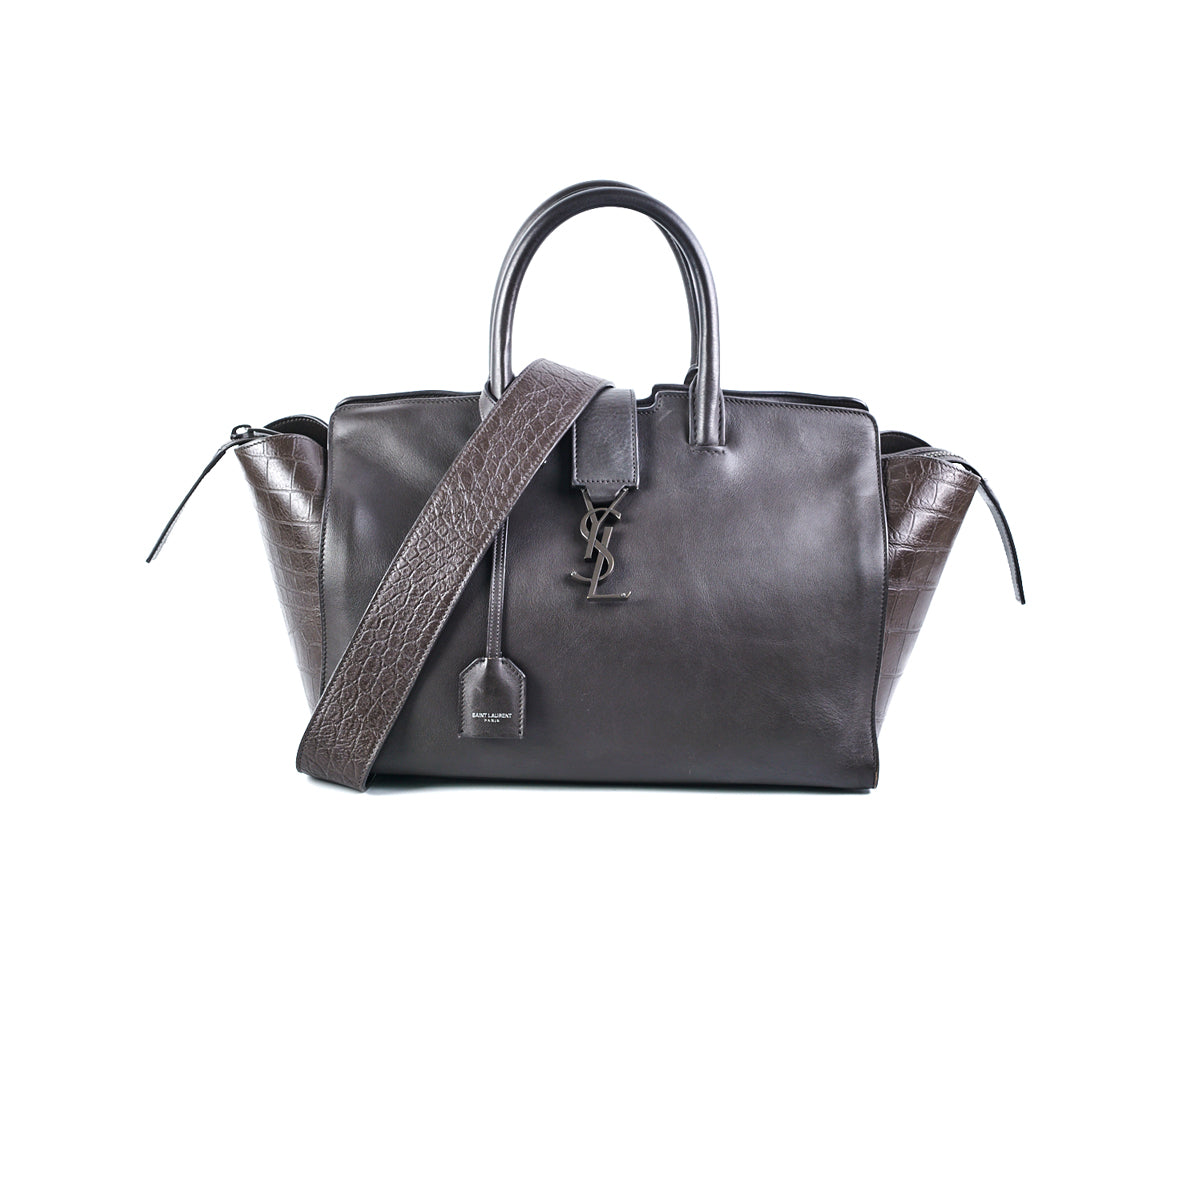 ysl downtown cabas